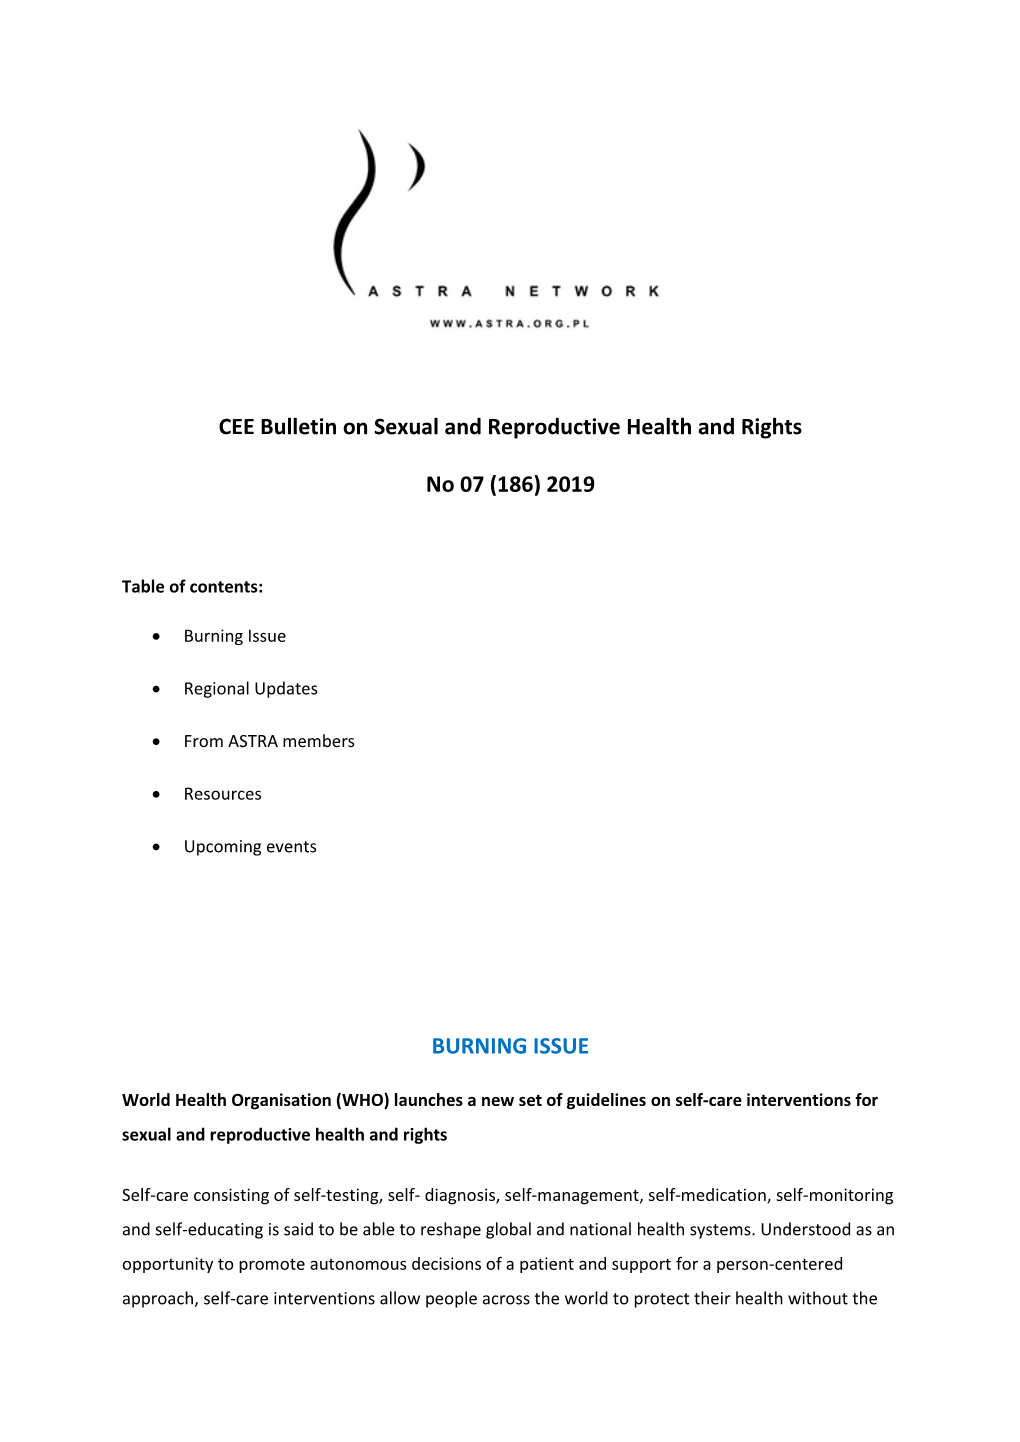 CEE Bulletin on Sexual and Reproductive Health and Rights No